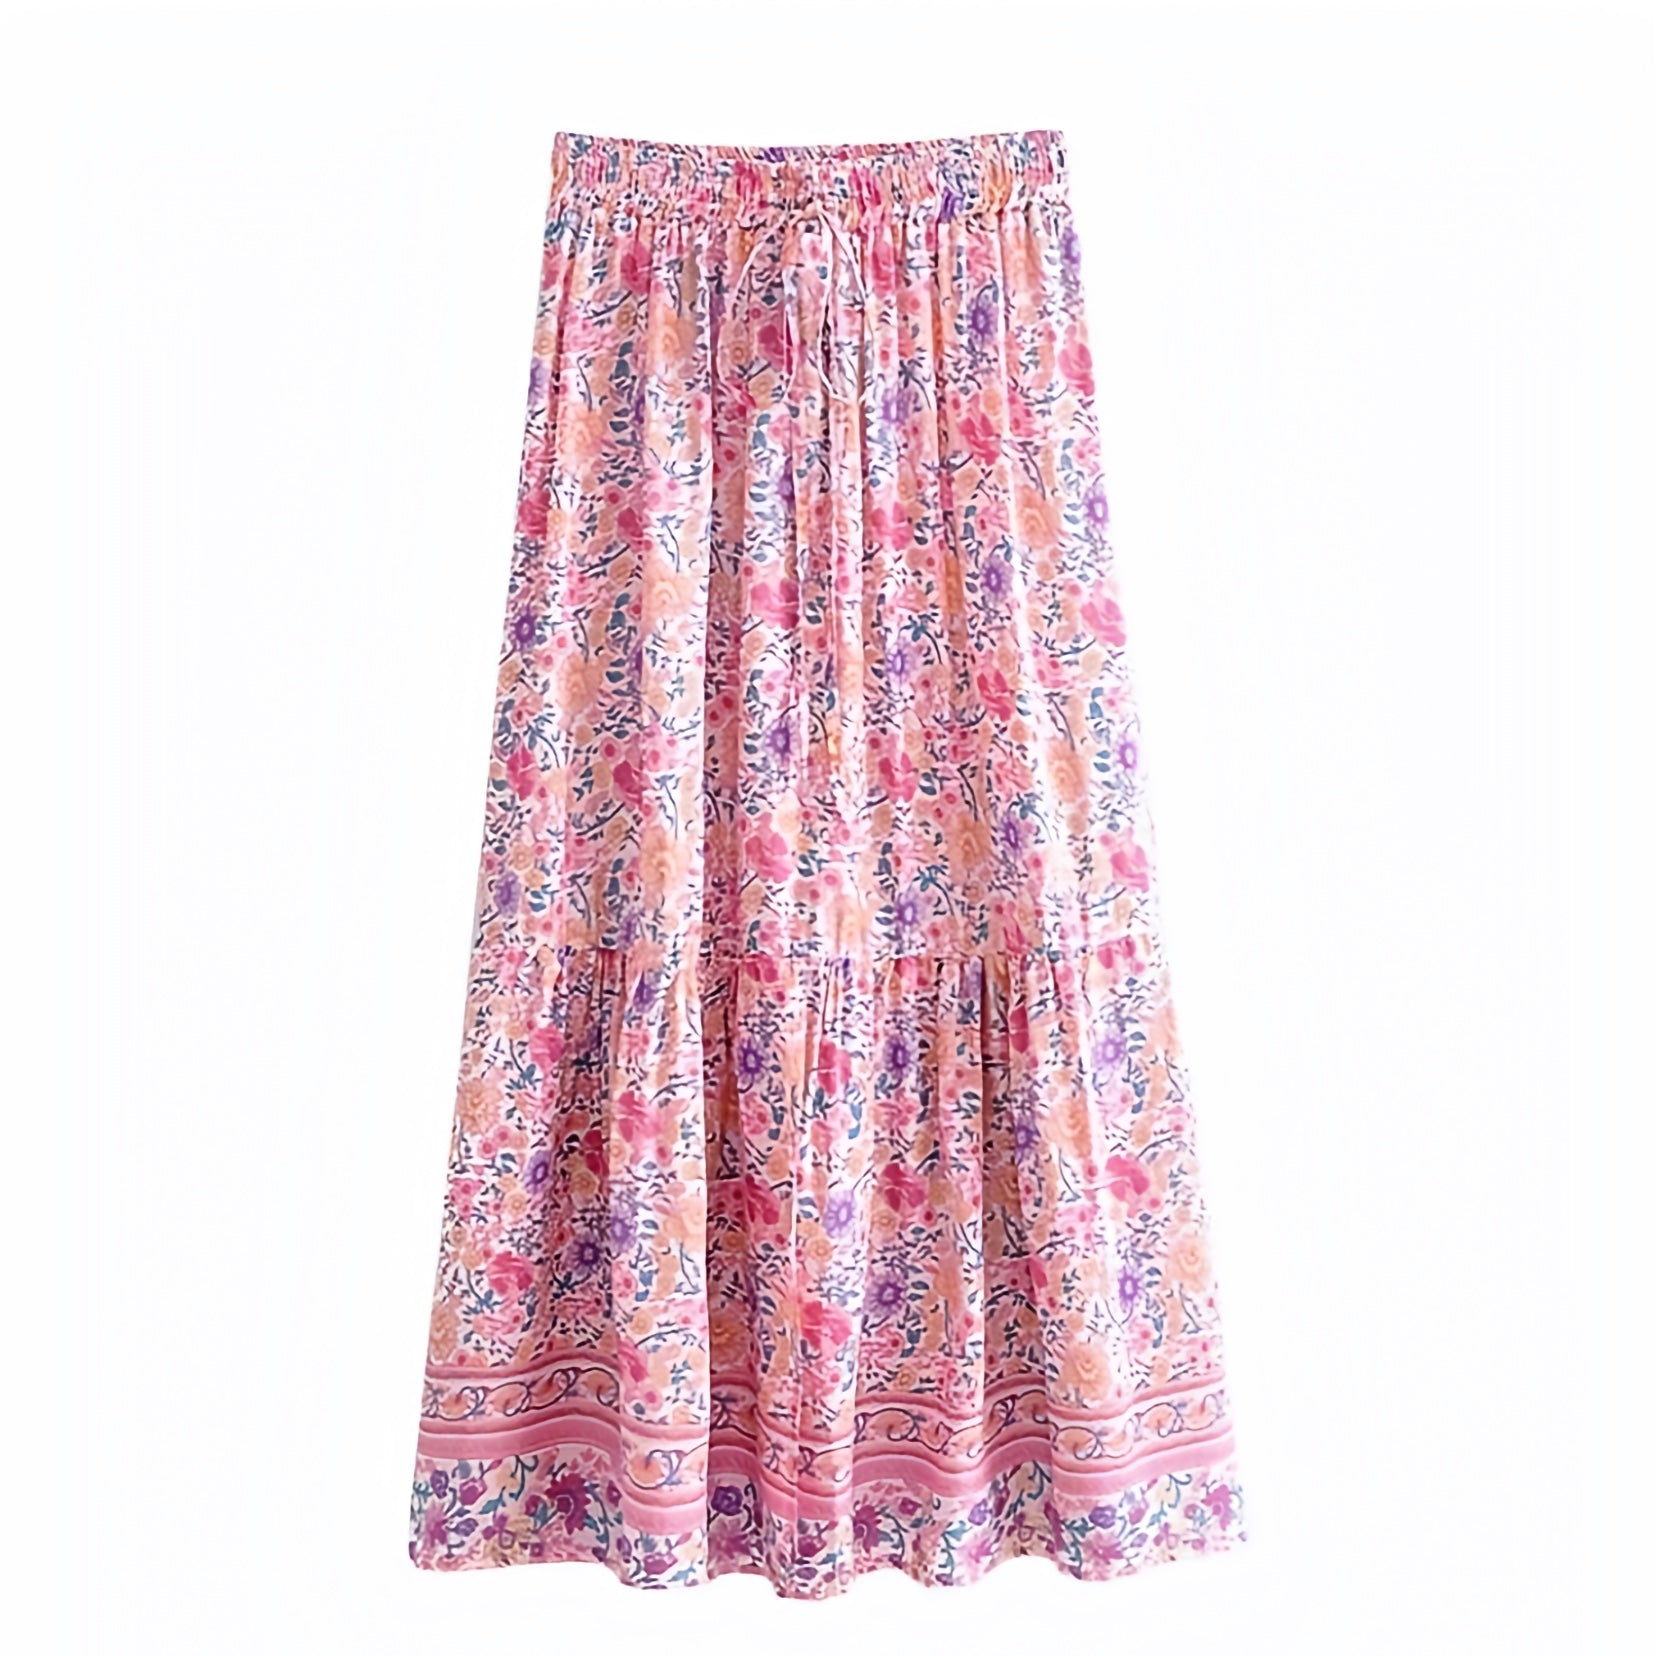 floral-print-light-pink-purple-multi-color-flower-patterned-slim-fit-mid-low-rise-waisted-fitted-waist-draw-string-tied-tiered-linen-boho-bohemian-flowy-midi-long-maxi-skirt-women-ladies-teens-tweens-chic-trendy-spring-2024-summer-elgeant-casual-feminine-preppy-style-tropical-hawaiian-beach-wear-vacation-skirts-altard-state-zara-aritzia-revolve-mango-dupe